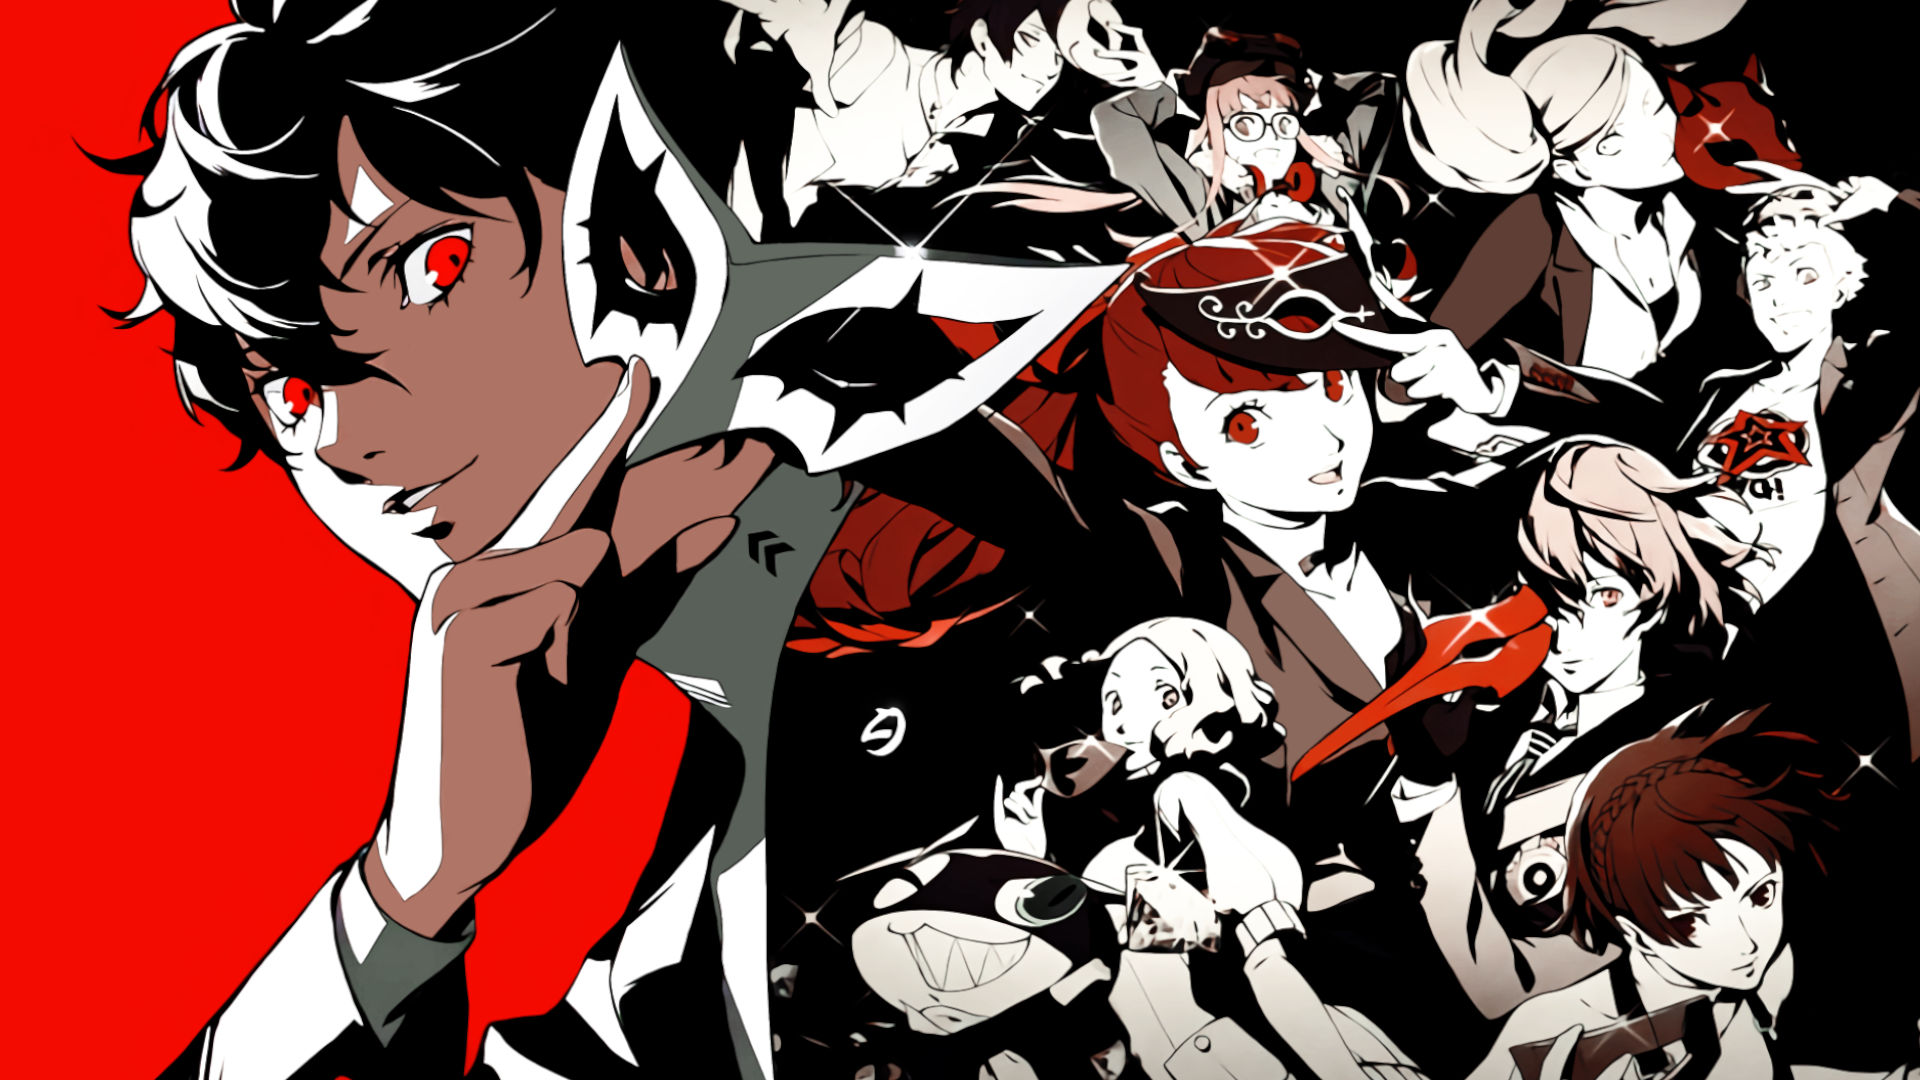 Sony Sending Out Even More Persona 5 Royal Dynamic PS4 Themes and Avatars   Push Square